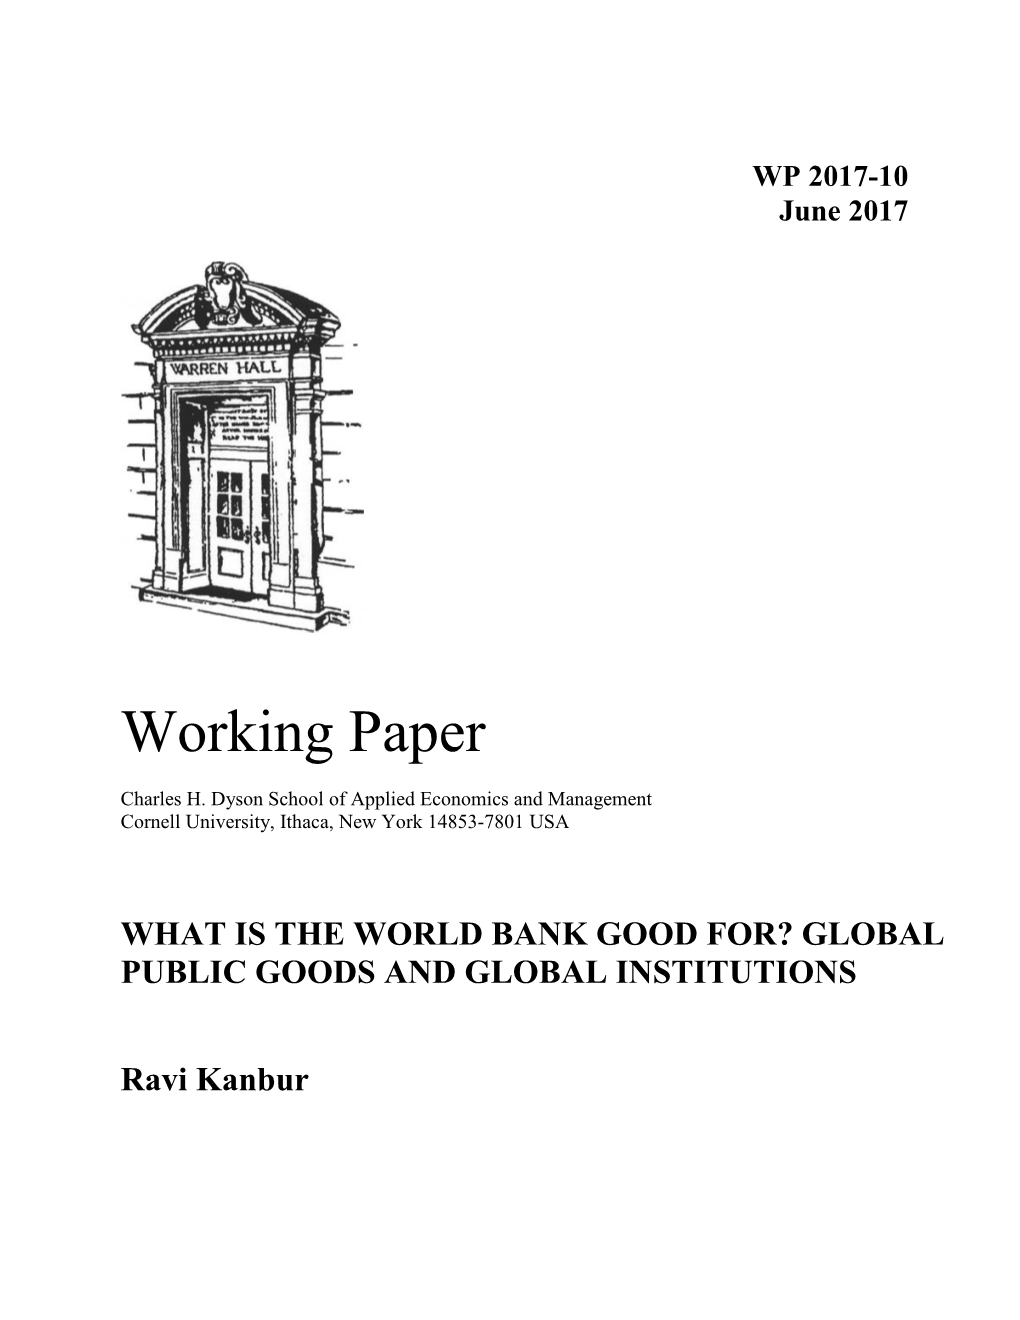 What Is the World Bank Good For? Global Public Goods and Global Institutions